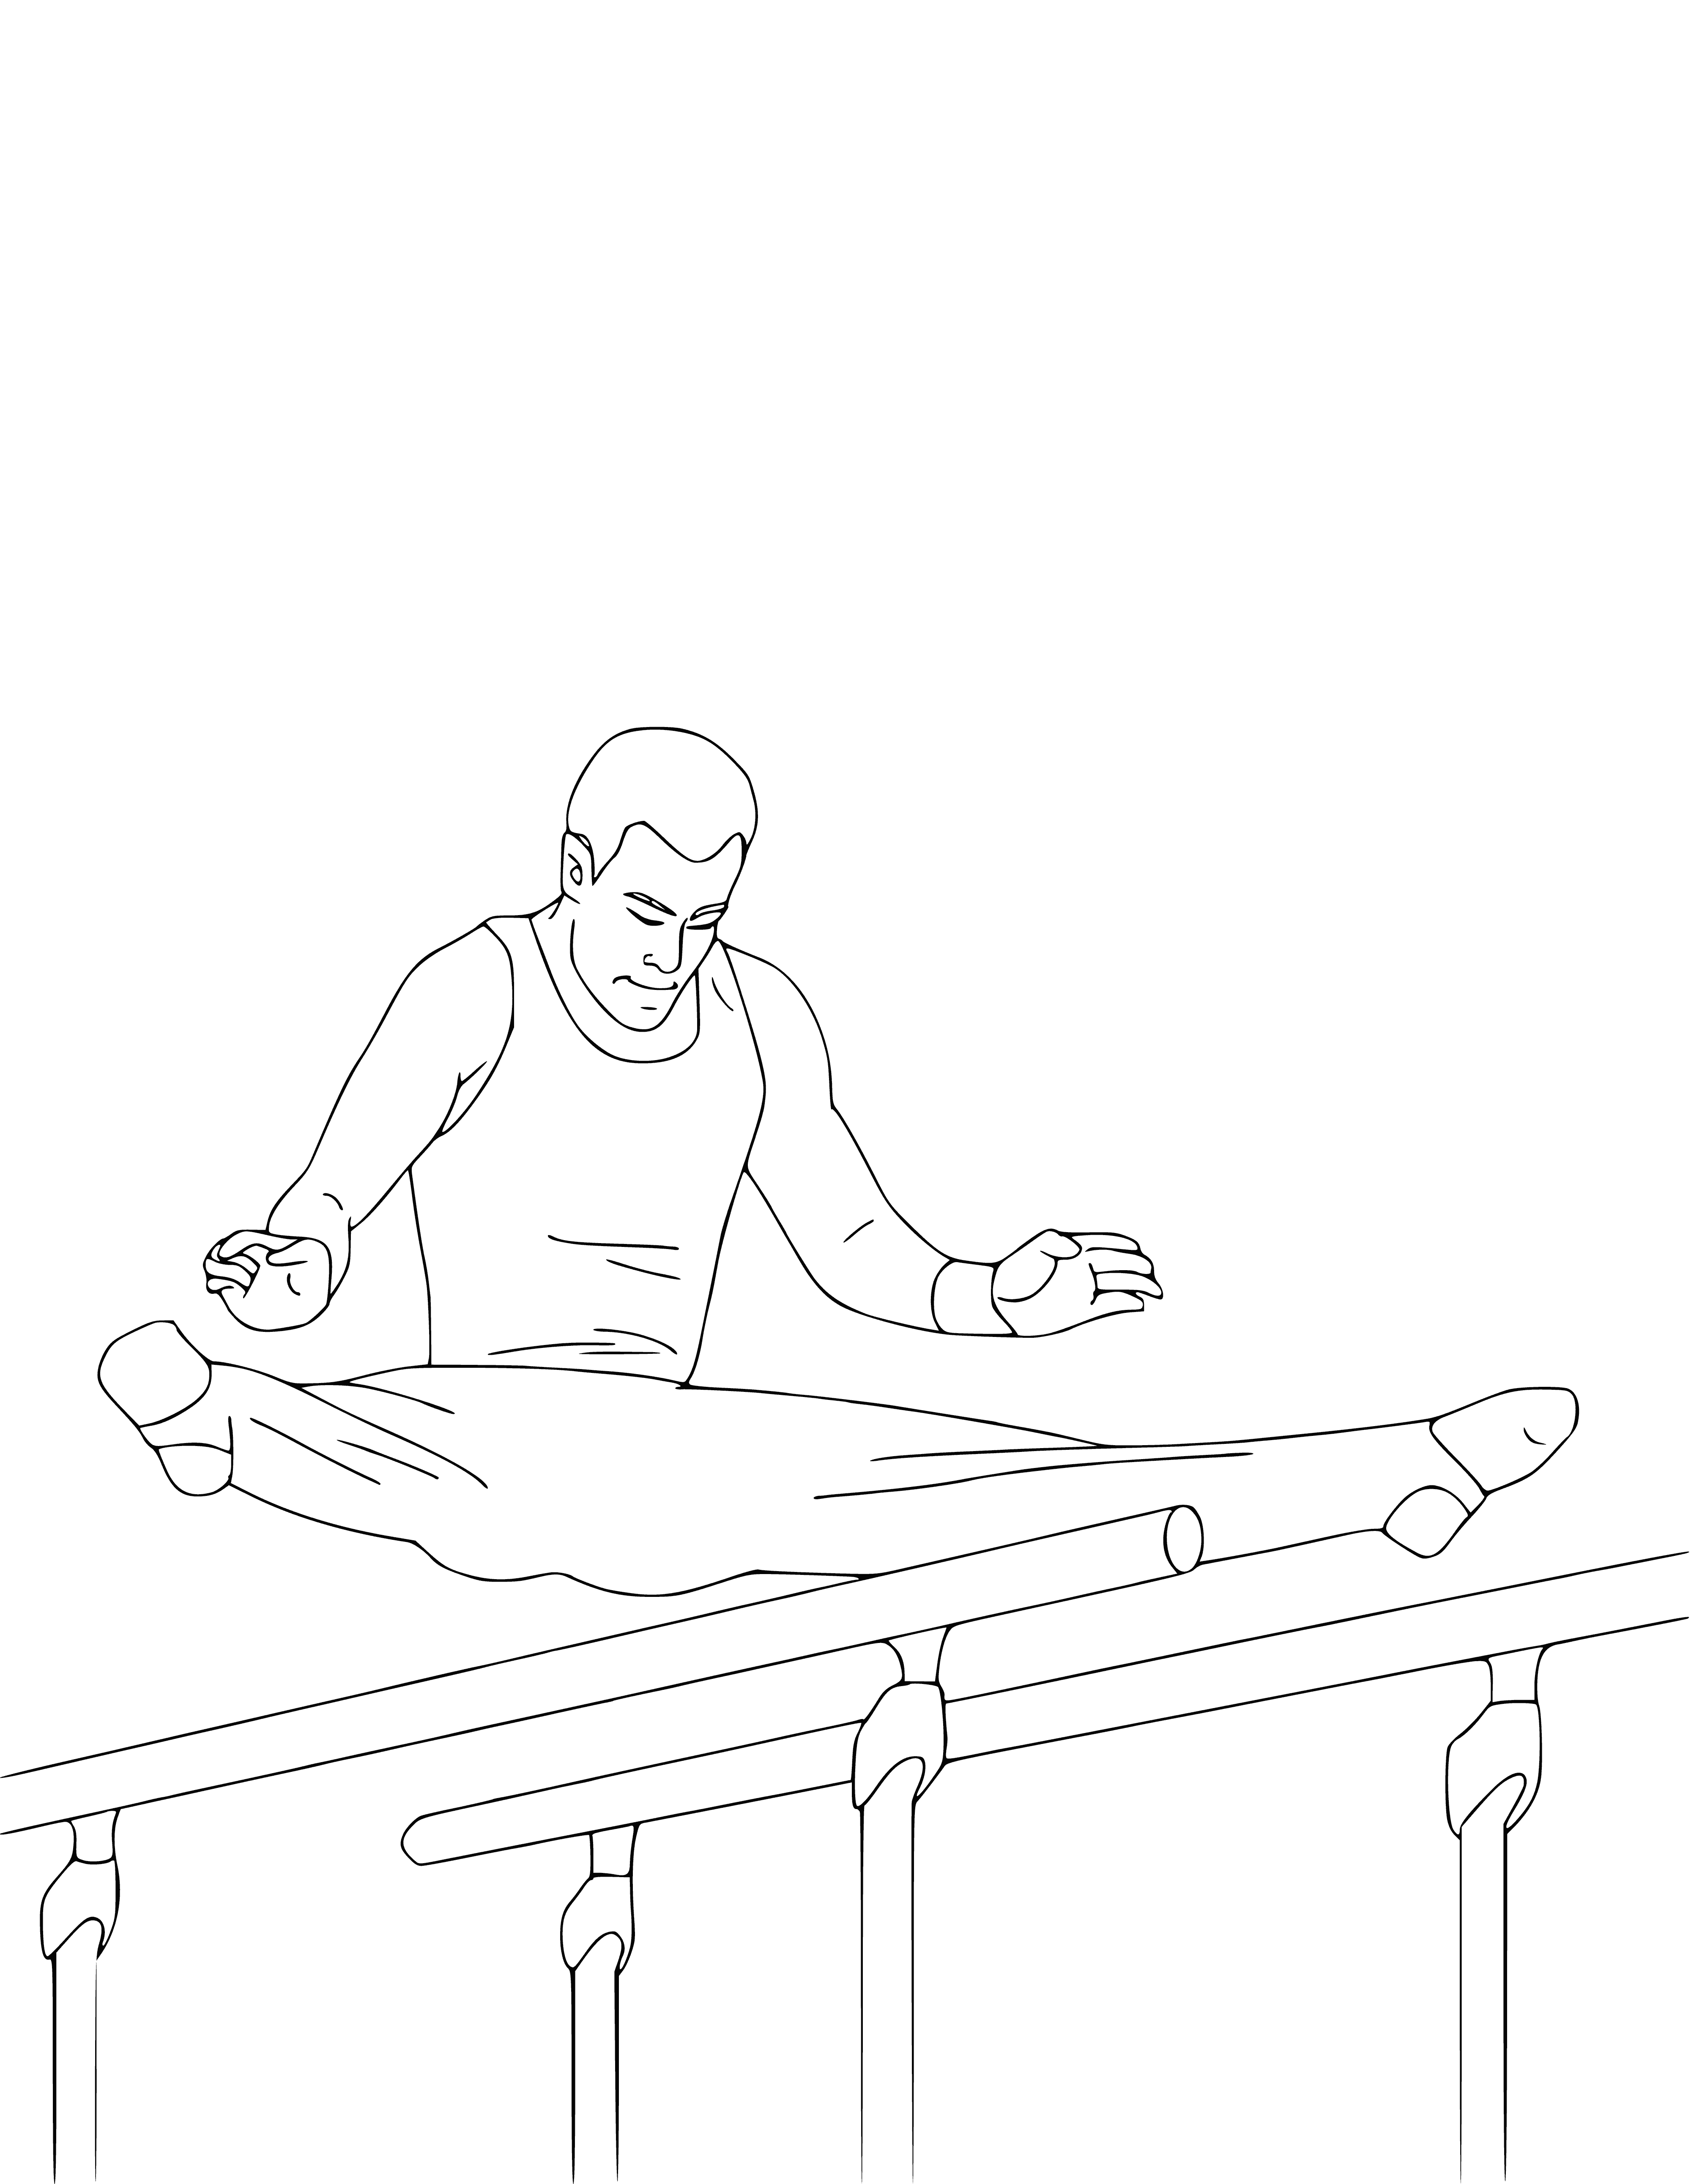 coloring page: Woman exercises on uneven bars in leotard, gripping bars with hands, feet in air.